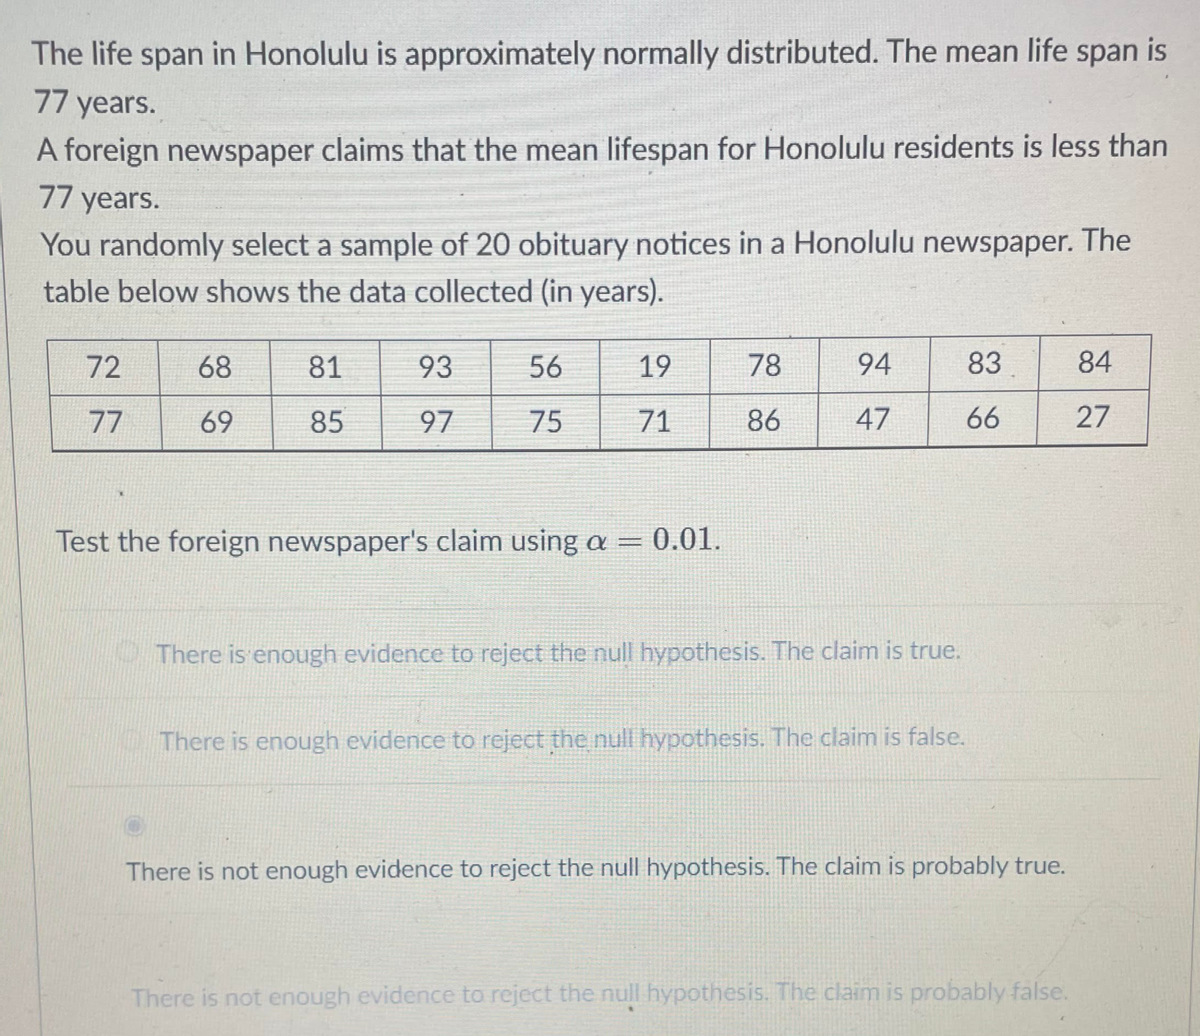 The life span in Honolulu is approximately normally distributed. The mean life span is
77 years.
A foreign newspaper claims that the mean lifespan for Honolulu residents is less than
77 years.
You randomly select a sample of 20 obituary notices in a Honolulu newspaper. The
table below shows the data collected (in years).
72
68
81
93
56
19
78
94
83
84
77
69
85
97
75
71
86
47
66
27
Test the foreign newspaper's claim using a = 0.01.
There is enough evidence to reject the null hypothesis. The claim is true.
There is enough evidence to reject the null hypothesis. The claim is false.
There is not enough evidence to reject the null hypothesis. The claim is probably true.
There is not enough evidence to reject the null hypothesis. The claim is probably false.
